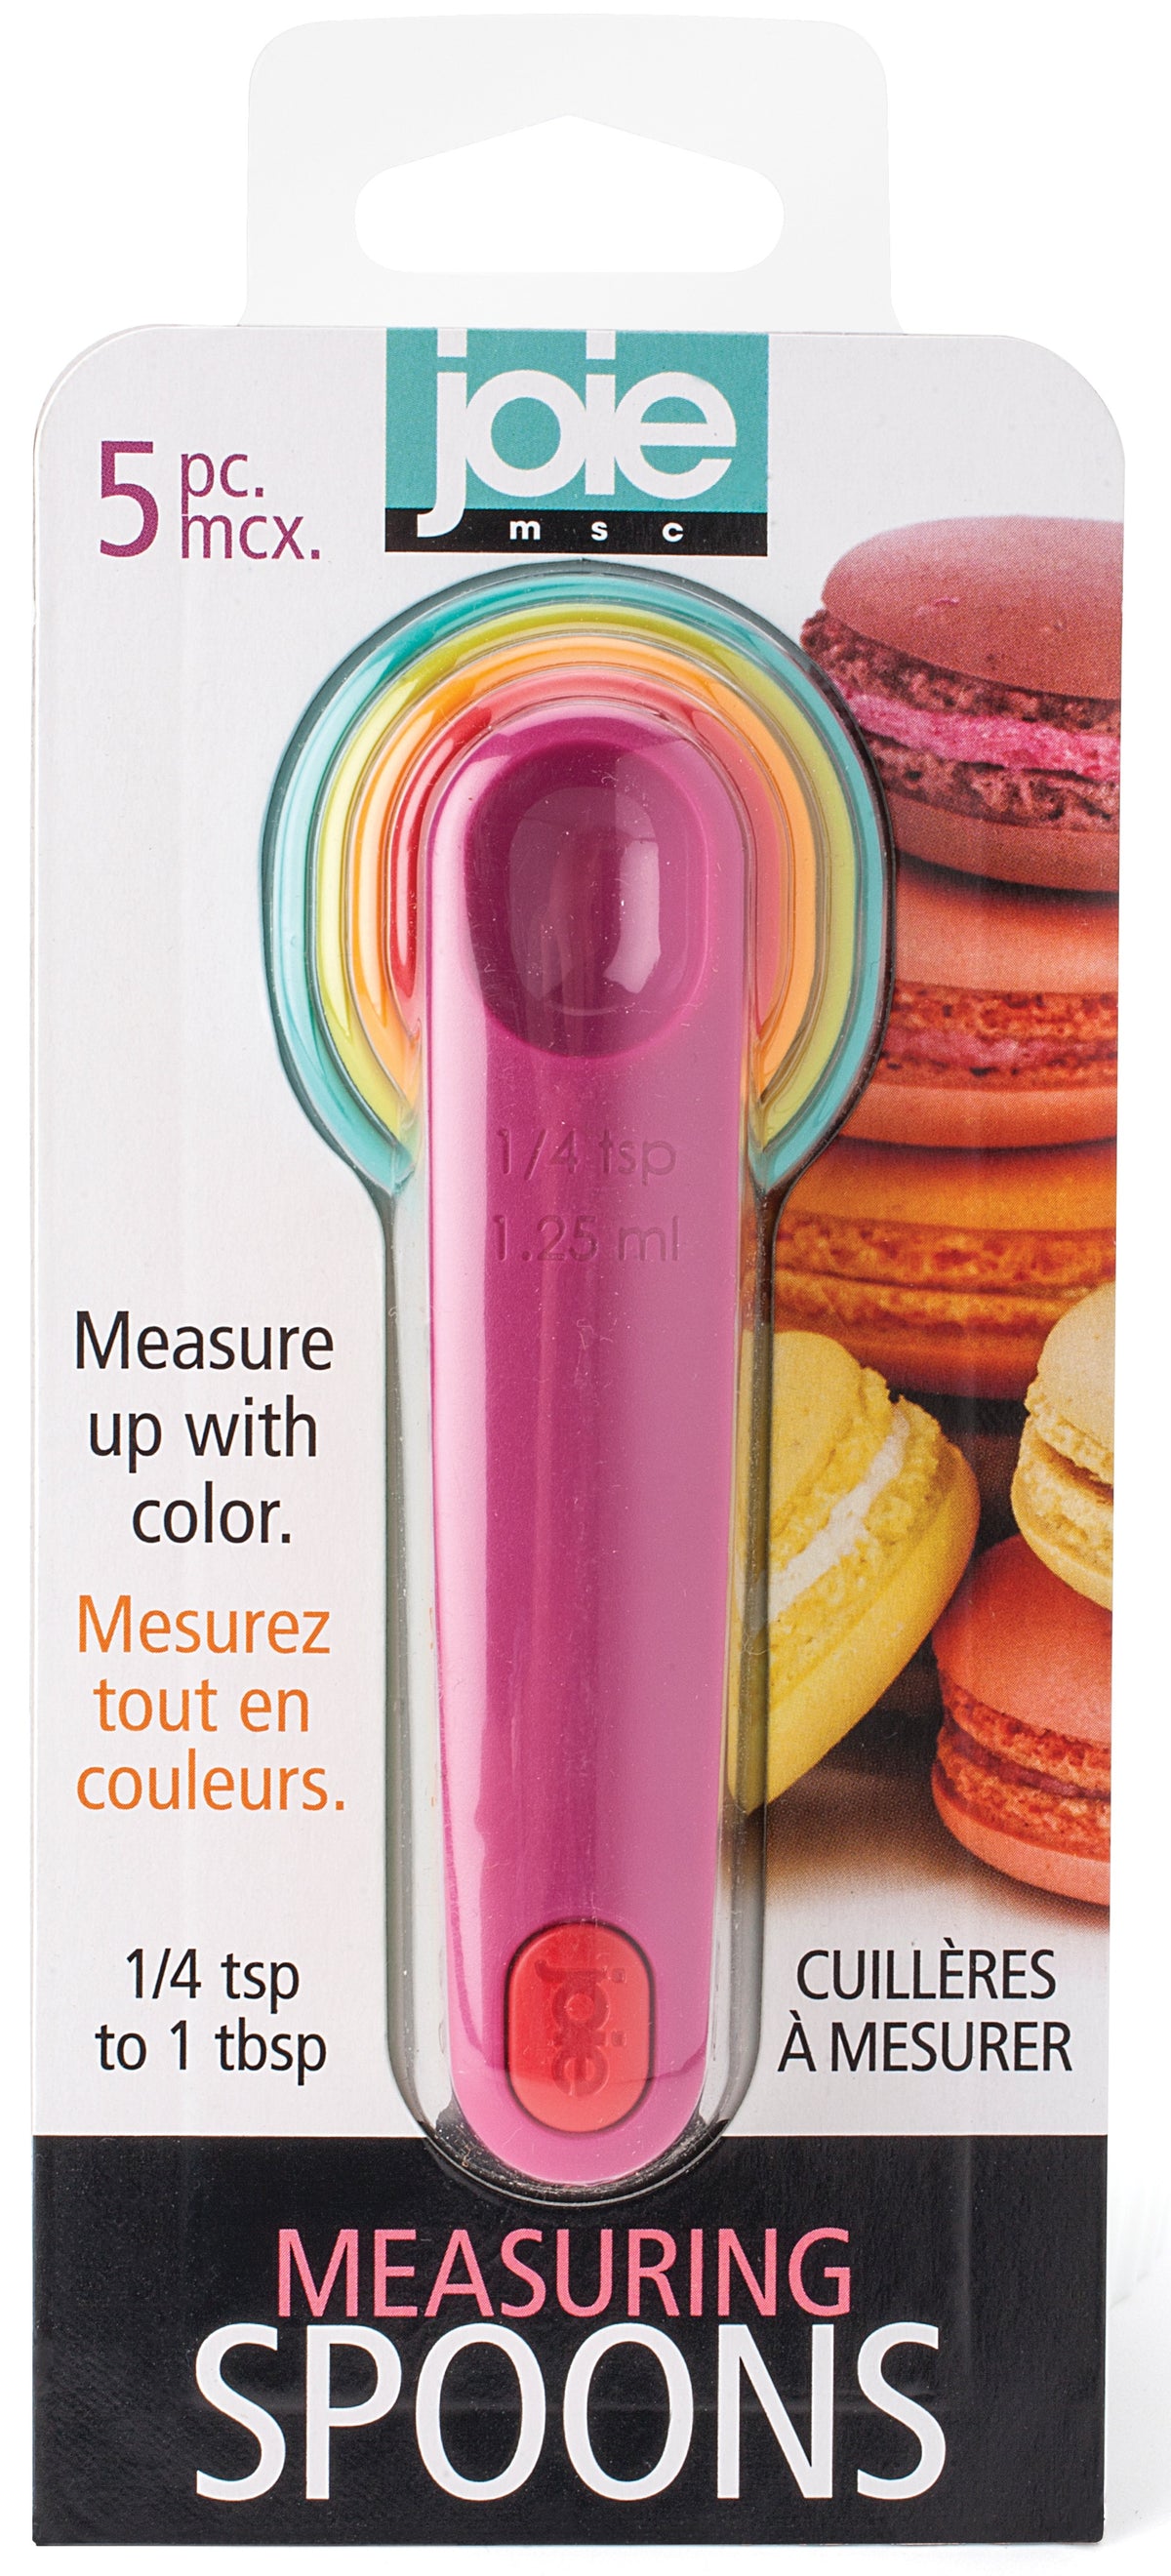 Joie MSC 26799 Measuring Spoons, Assorted Colors